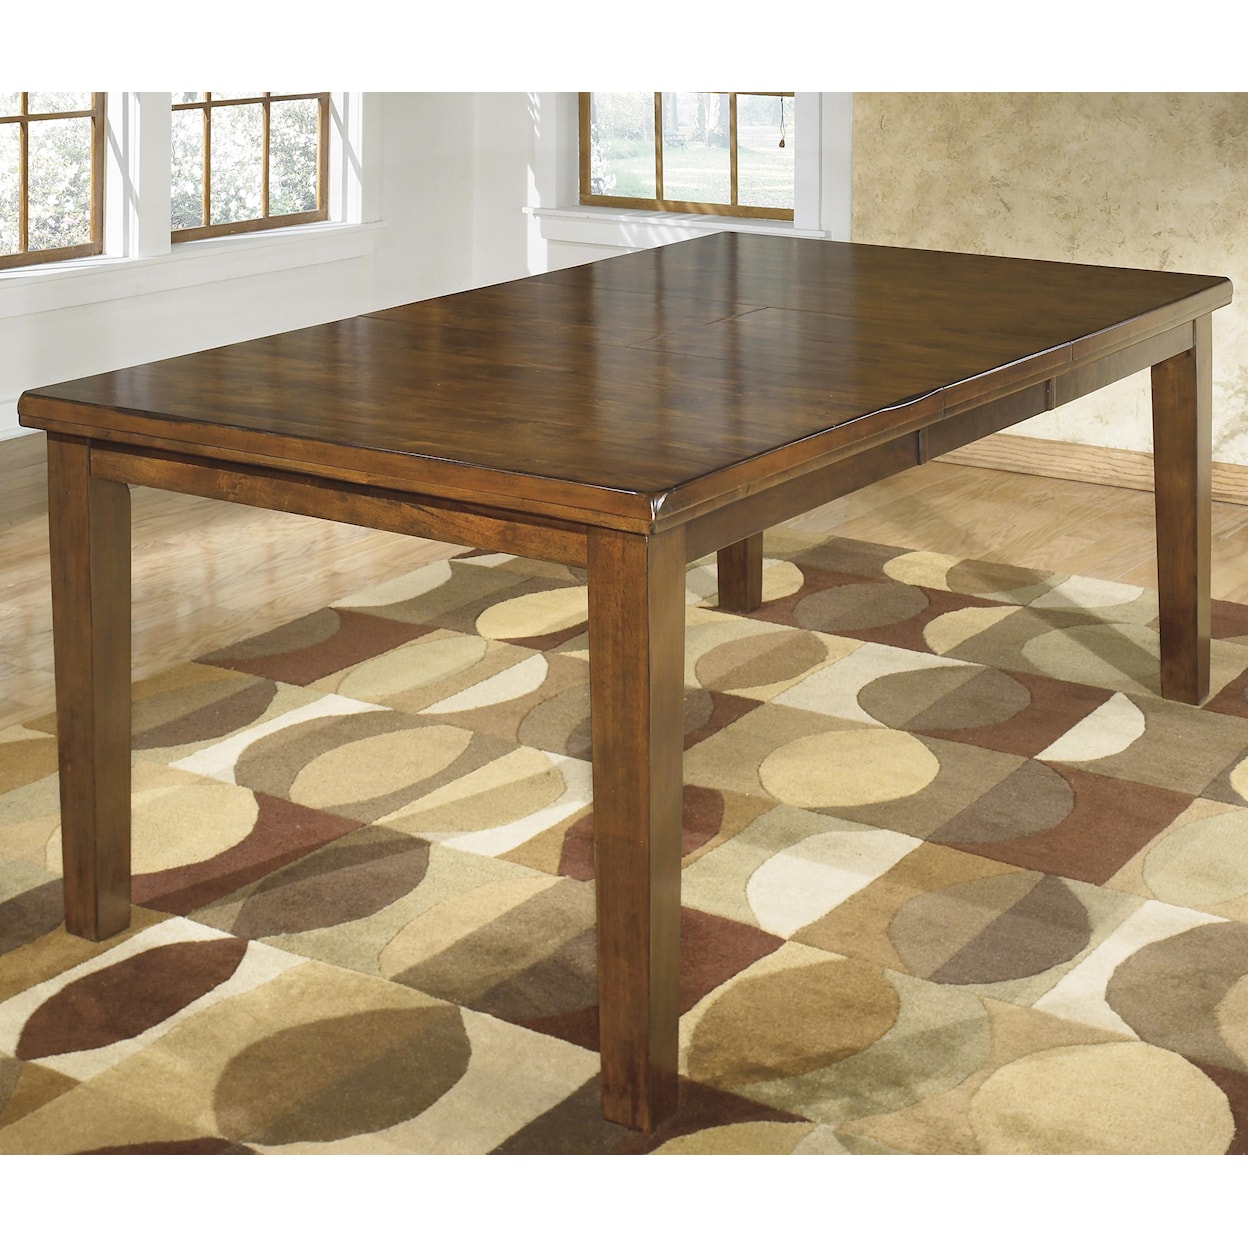 Signature Design by Ashley Furniture Ralene Rectangular Butterfly Leaf Dining Table